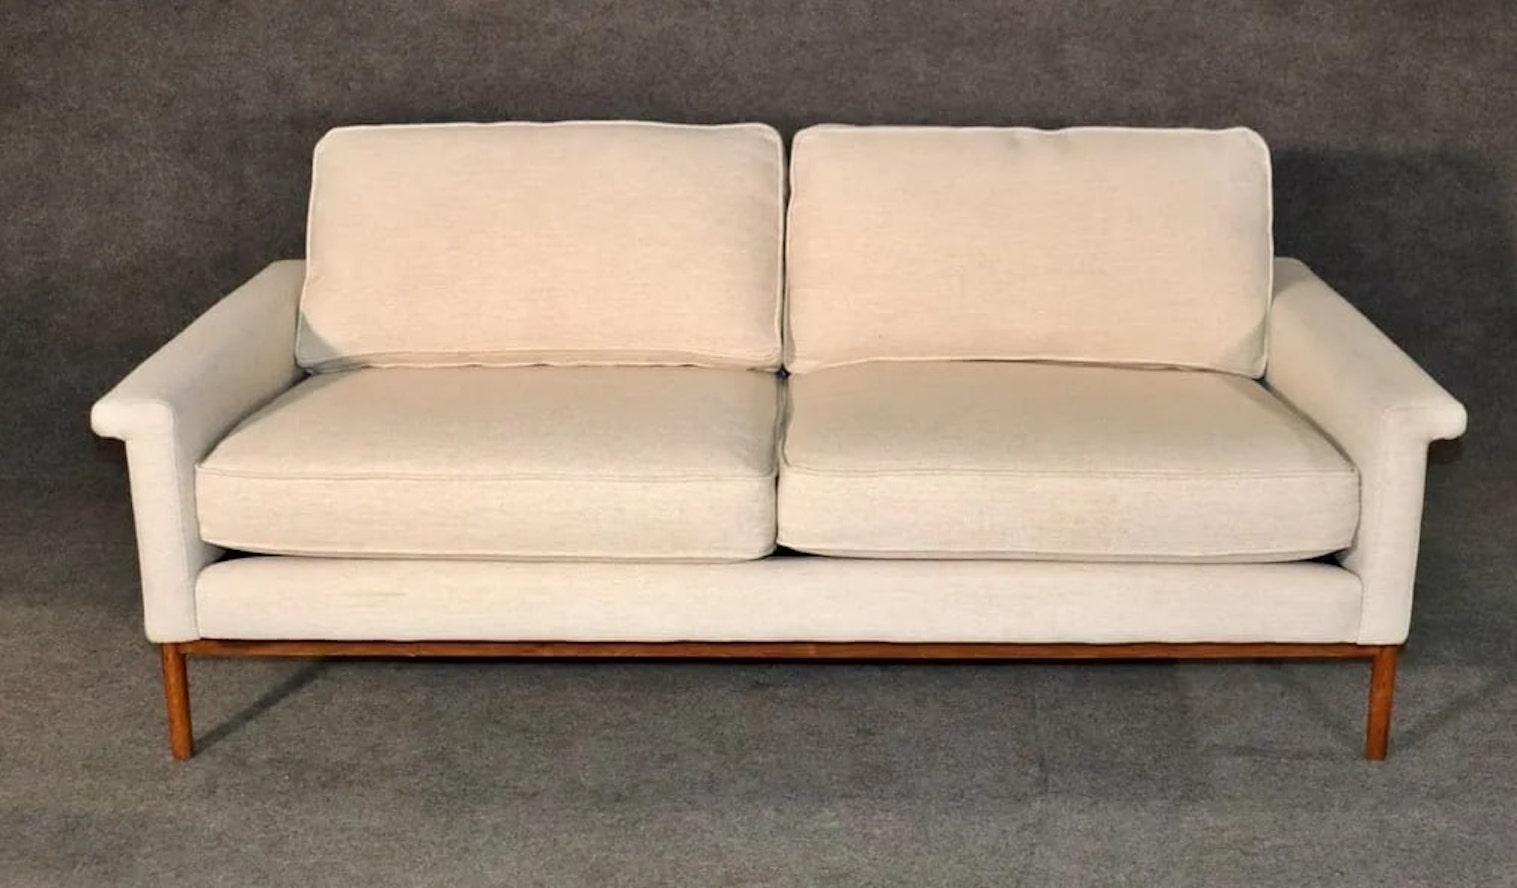 Danish modern style love seat with wrap around wood frame. This love seat has great modern lines with arms that wrap over the wood frame.
Please confirm location NY or NJ